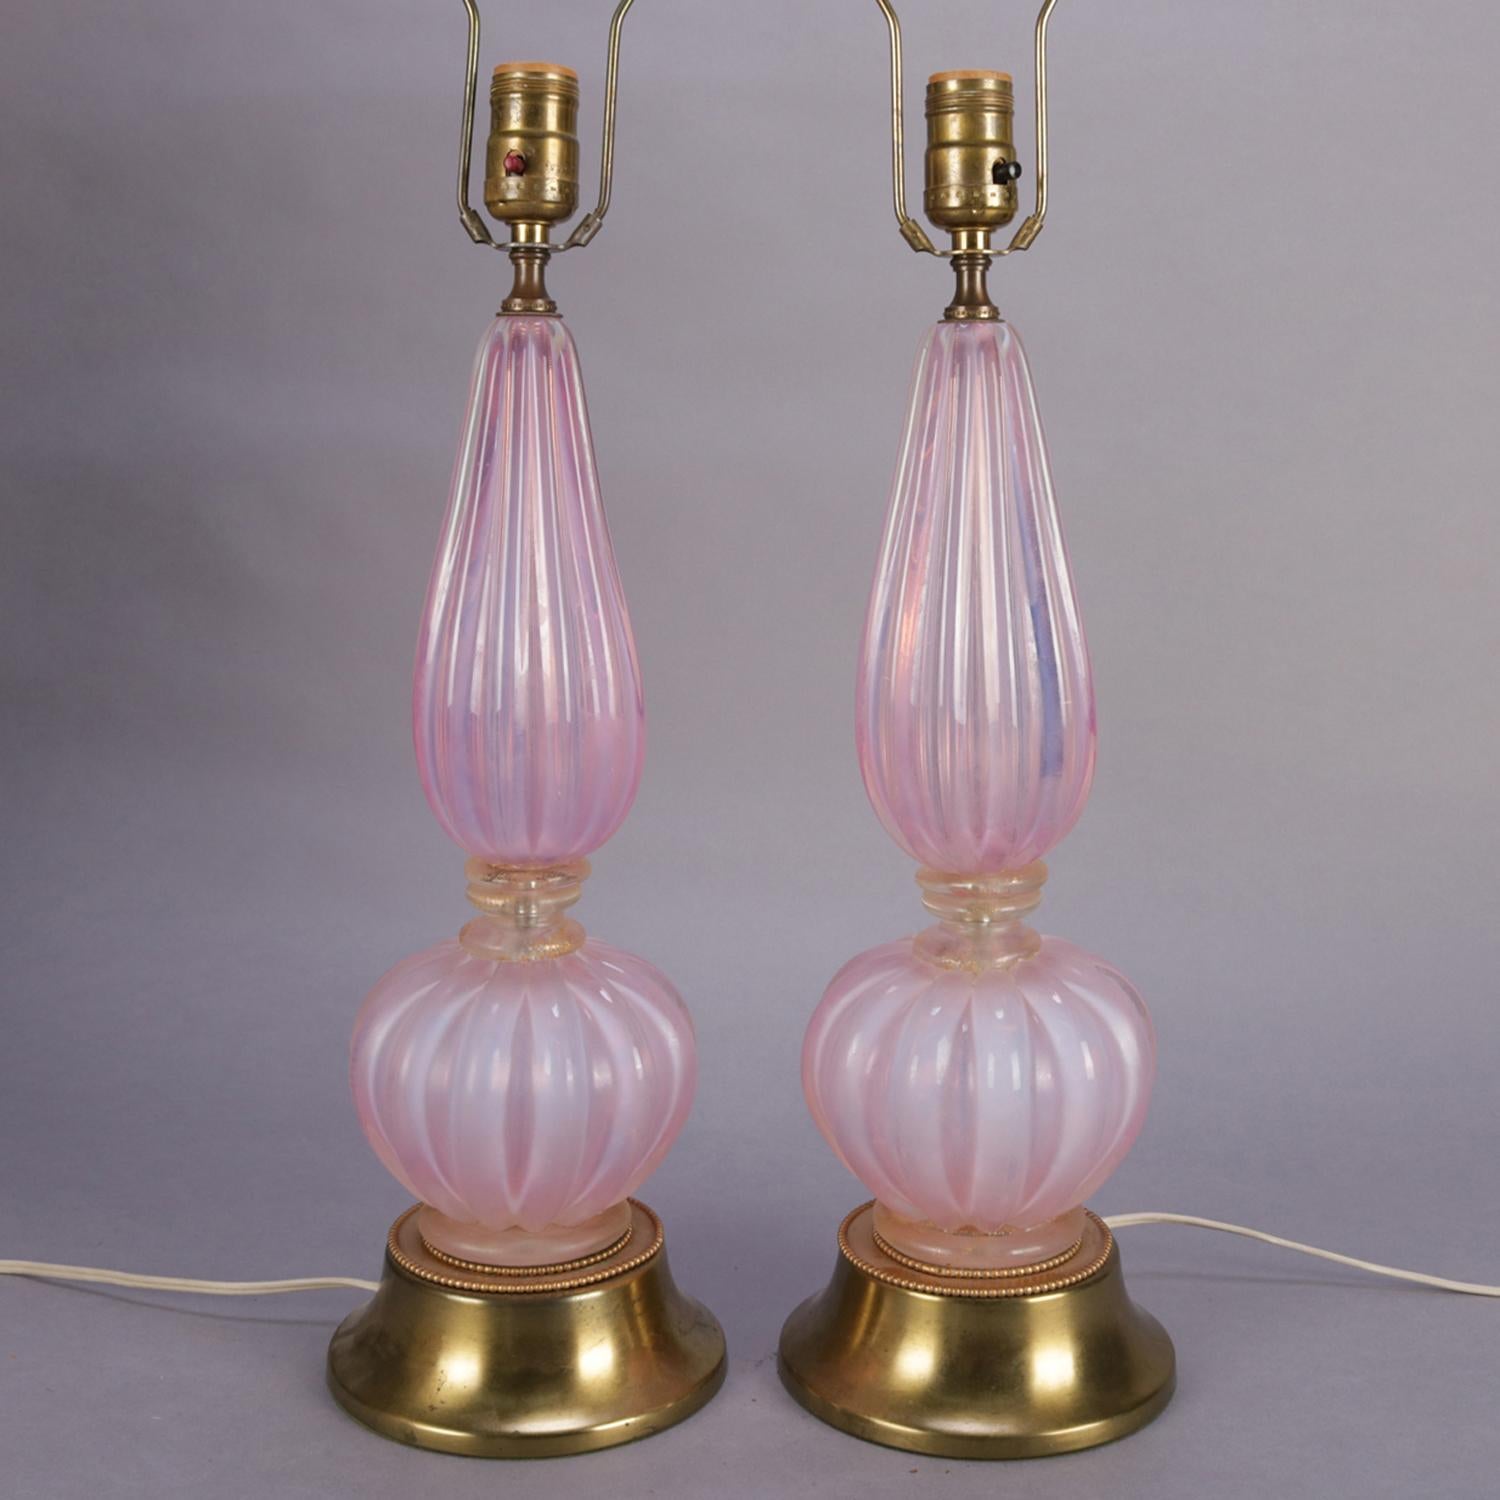 A pair of Mid-Century Modern table lamps feature pink opalescent Venetian Murano glass vases in gourd form with gilt at waists and are seated on brass base, circa 1960.

Measures: 31